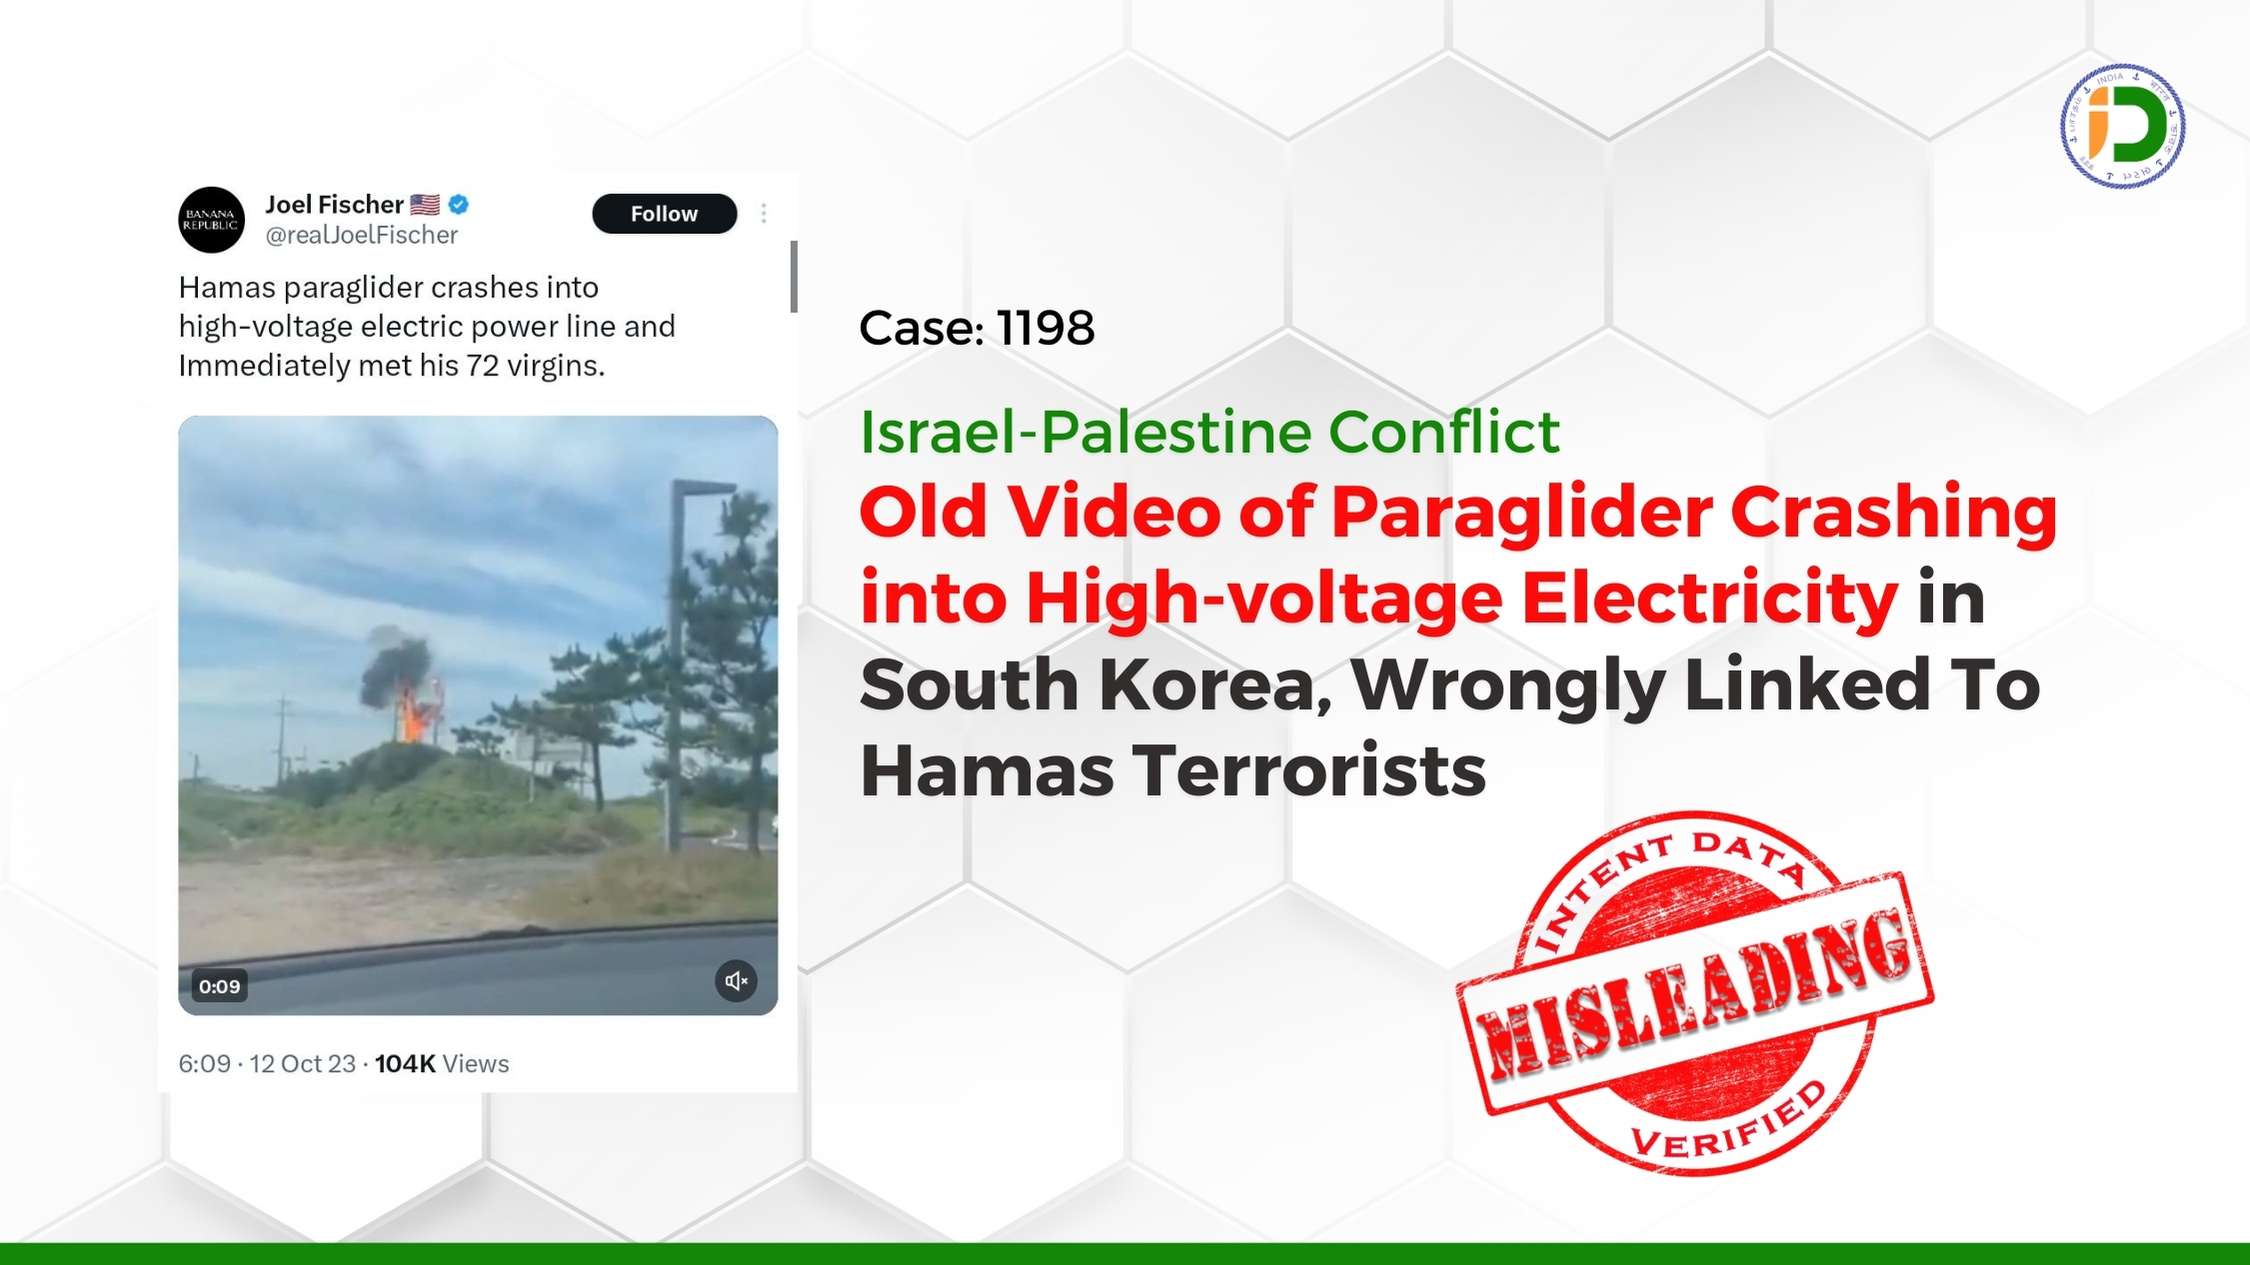 Israel-Palestine Conflict — Old Video of Paraglider Crashing into High-voltage Electricity in South Korea, Wrongly Linked To Hamas Terrorists: Fact-Check